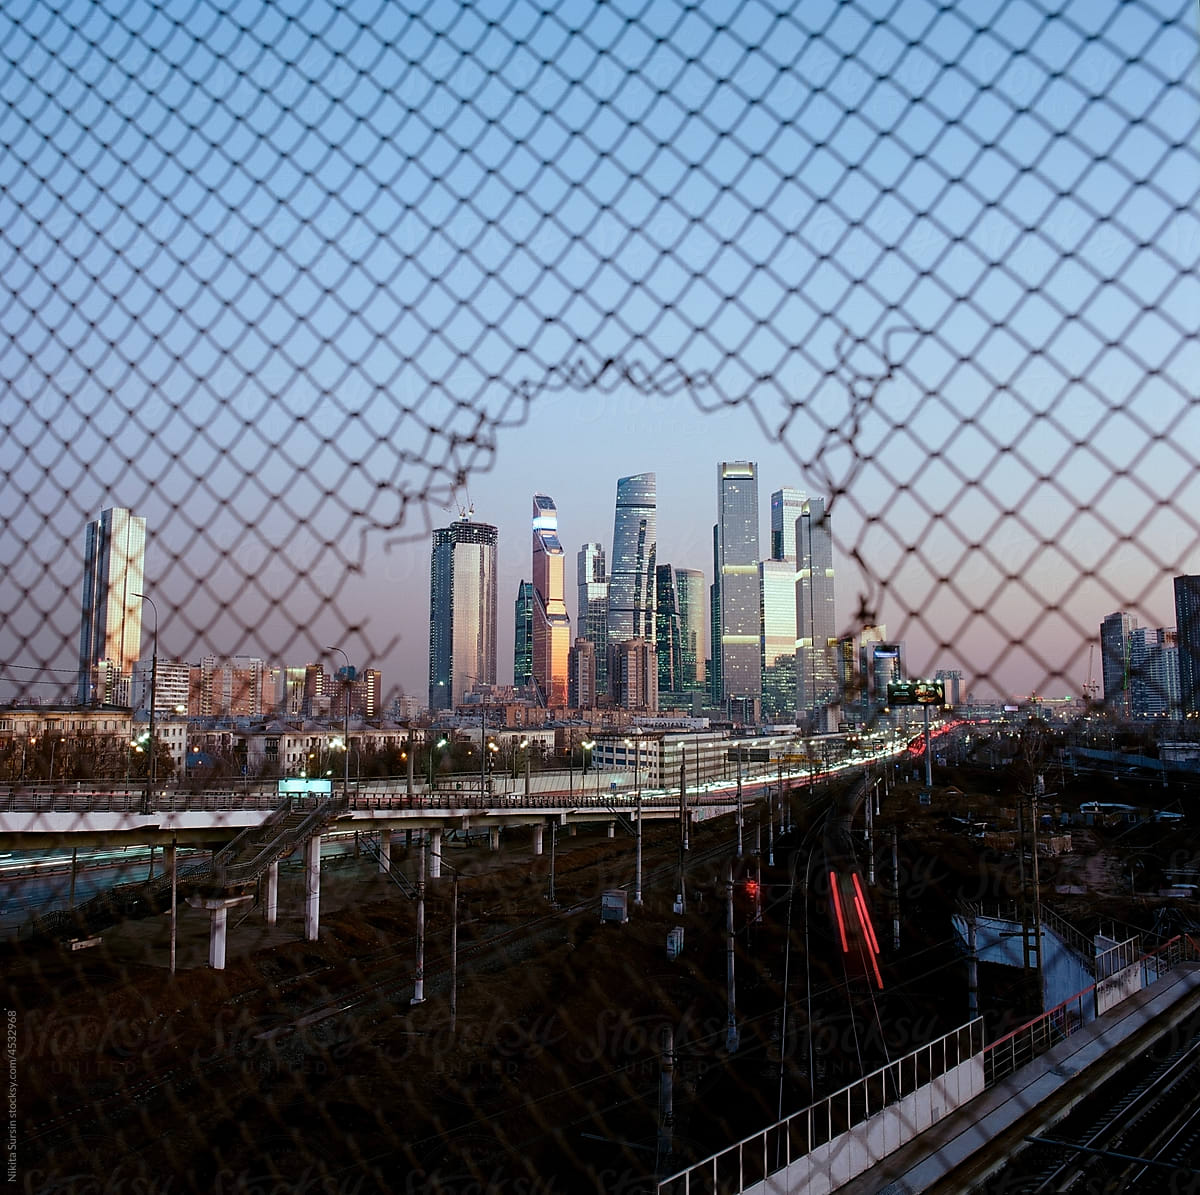 View Of City Seen Through Chainlink Fence in Moscow, Russia